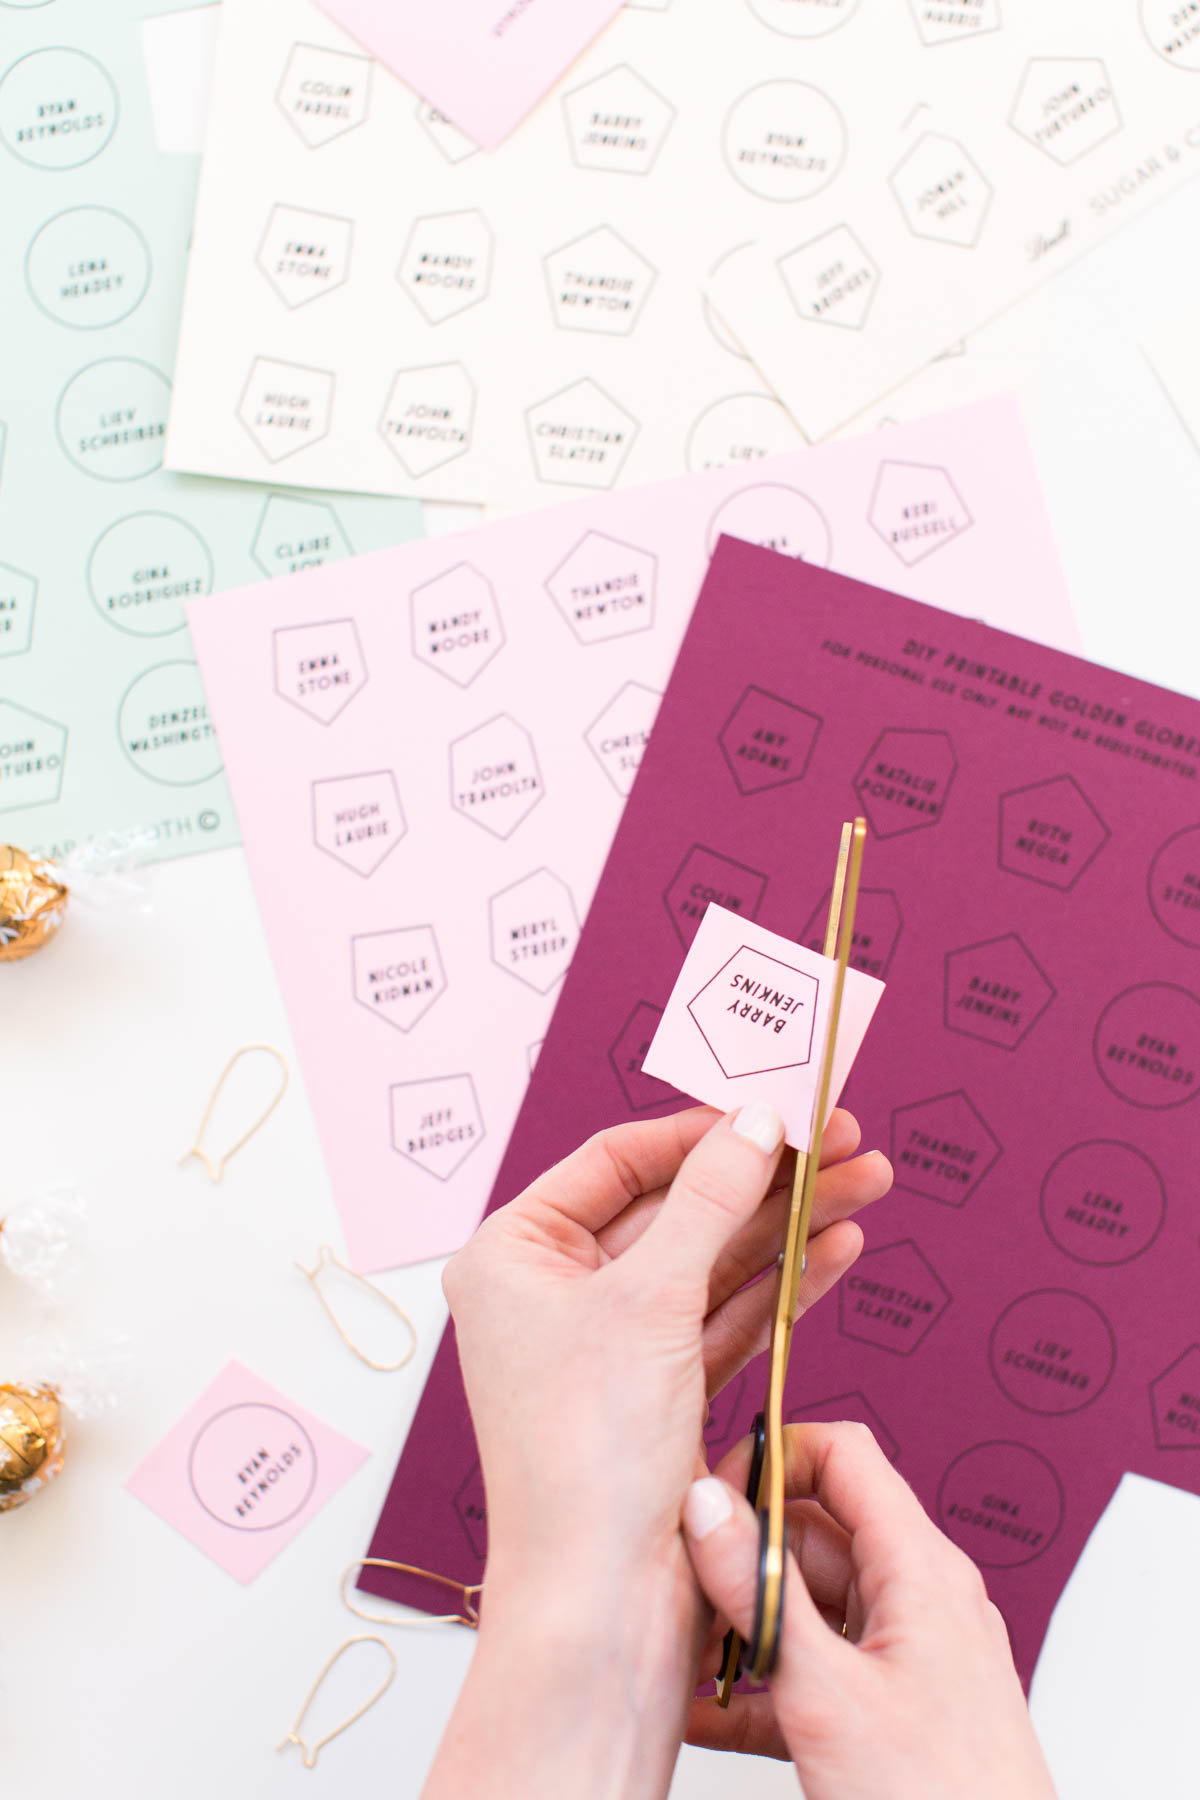 Printable DIY Golden Globes Drink Tags with Lindt Chocolate - by lifestyle blogger Ashley Rose of Sugar & Cloth in Houston, Texas